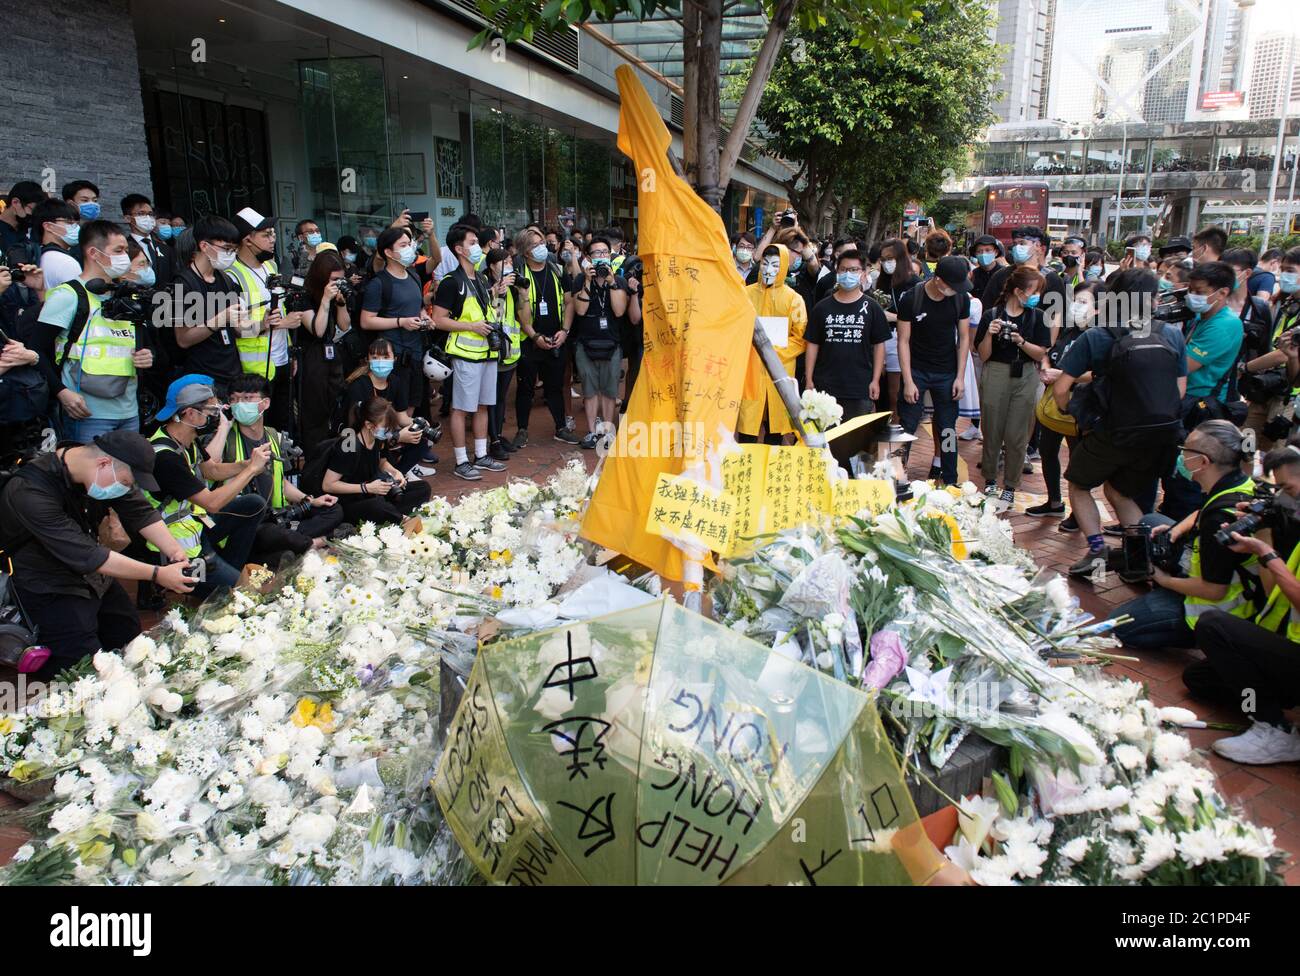 HONG KONG,HONG KONG SAR,CHINA: JUNE 15th 2020. Protesters take flowers to the site of Marco Leungs death at Pacific Place Mall in Admiralty Hong Kong. They are there to commemorate the first democracy protesters death on one year ago. Marco Leung fell to his death from scaffolding outside the building on 15th June 2019. He became known as the raincoat man.  Alamy Stock Image/Jayne Russell Stock Photo